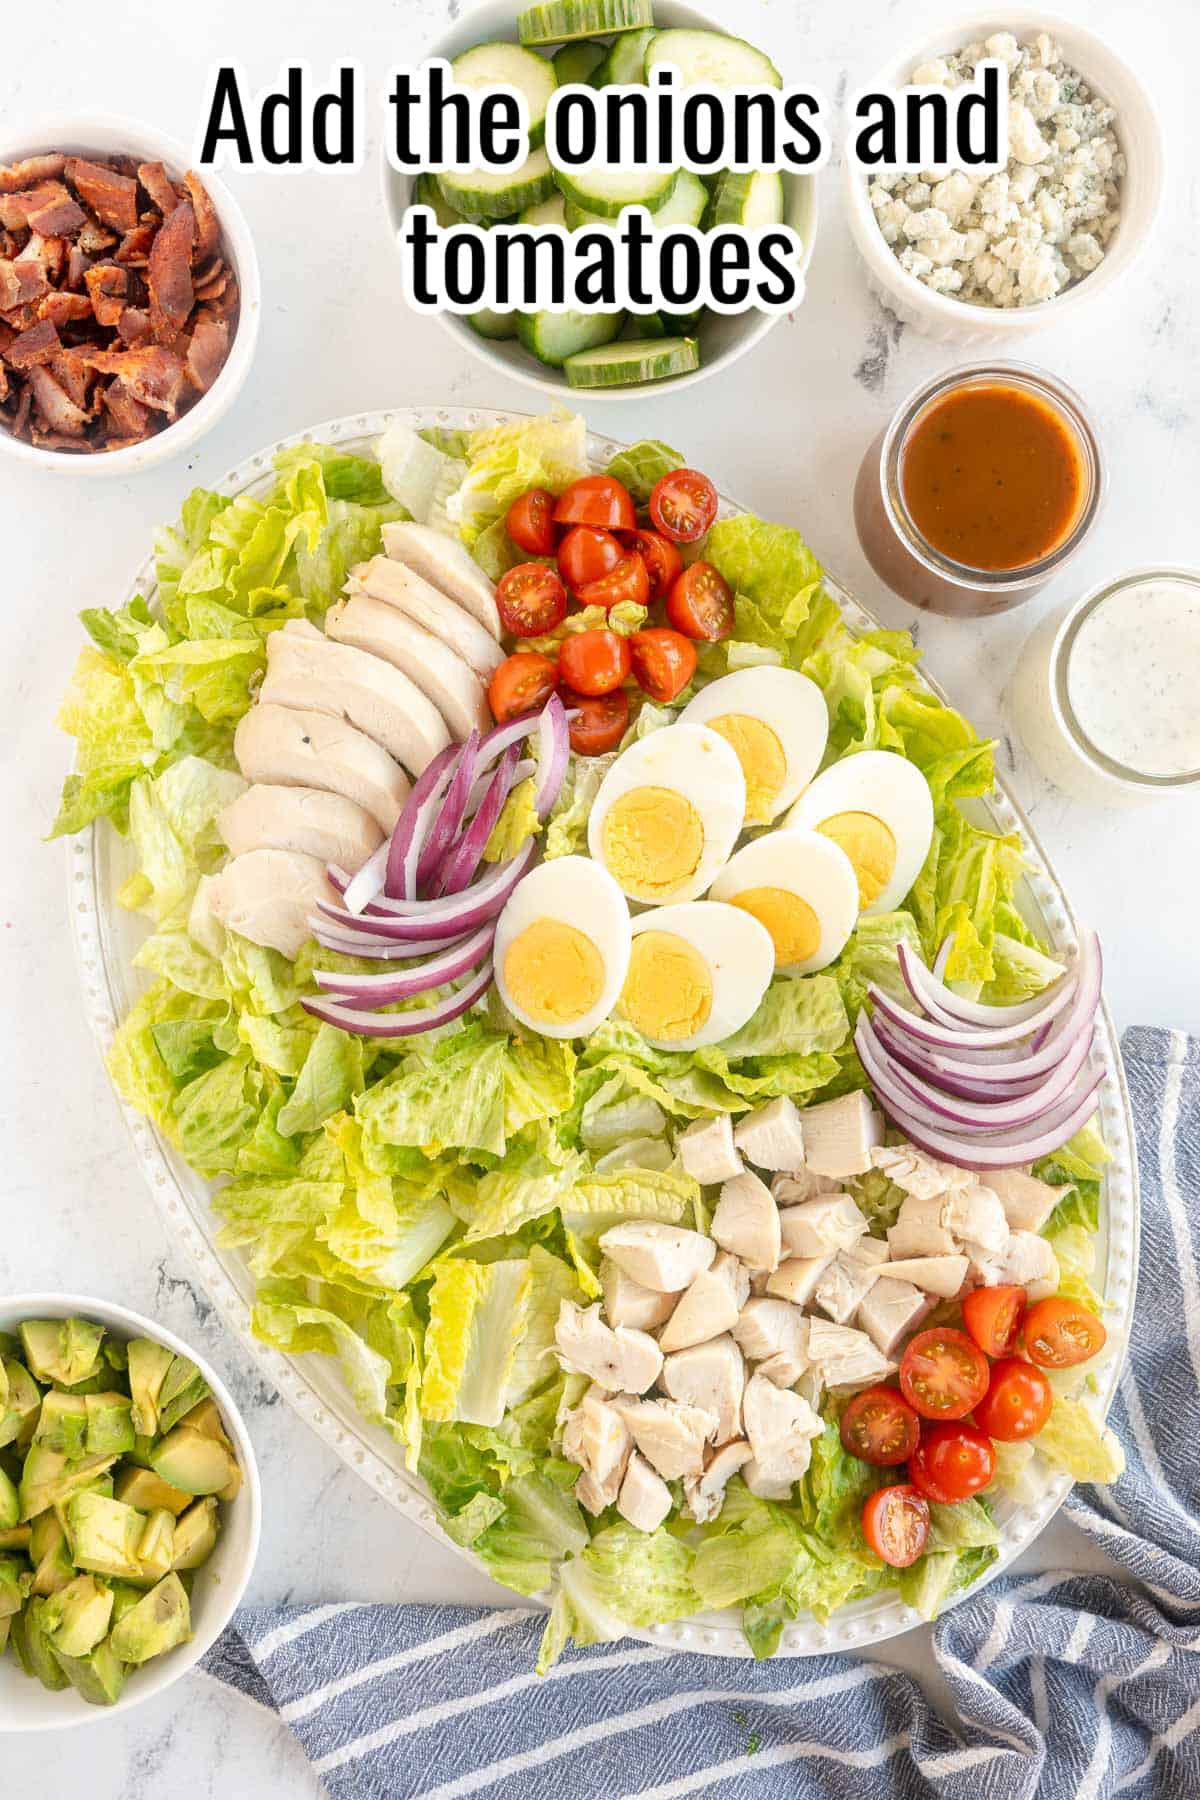 Platter with lettuce, chicken, eggs, tomatoes and onions.